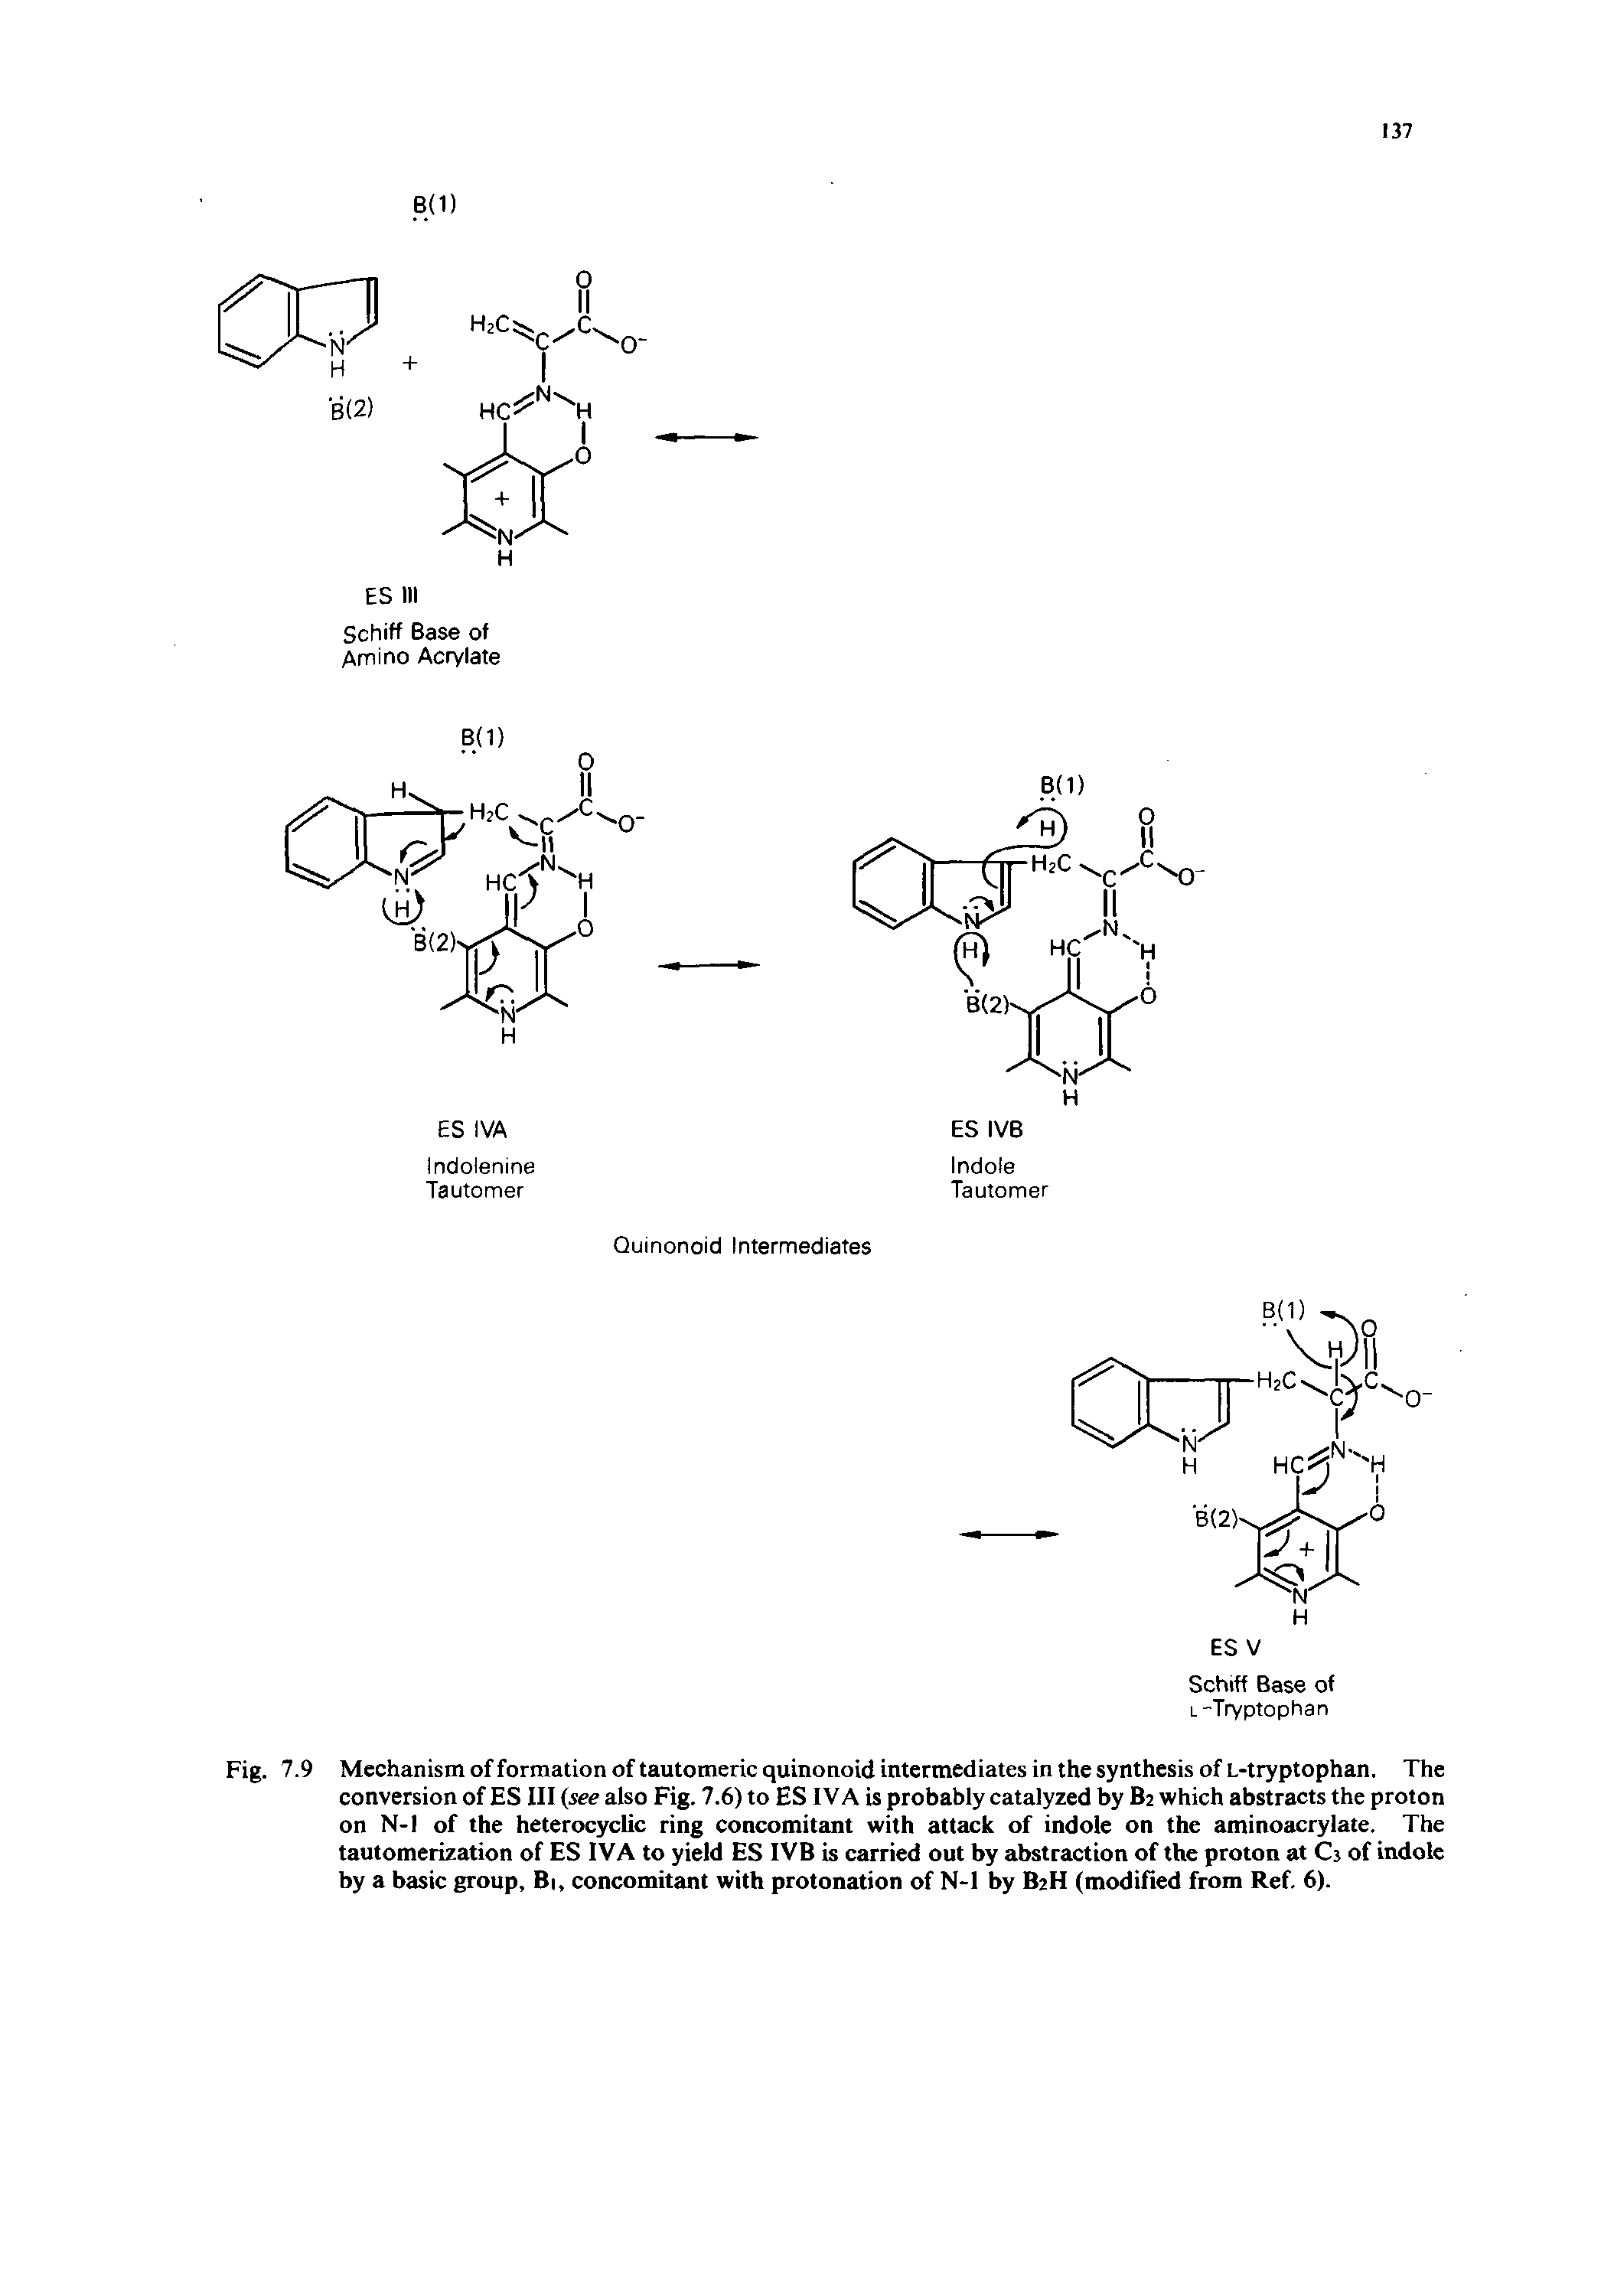 Fig. 7.9 Mechanism of formation of tautomeric quinonoid intermediates in the synthesis of L-tryptophan. The conversion of ES III (see also Fig. 7.6) to ES IVA is probably catalyzed by B2 which abstracts the proton on N-l of the heterocyclic ring concomitant with attack of indole on the aminoacrylate. The tautomerization of ES IVA to yield ES IVB is carried out by abstraction of the proton at C3 of indole by a basic group, Bi, concomitant with protonation of N-l by B2H (modified from Ref. 6).